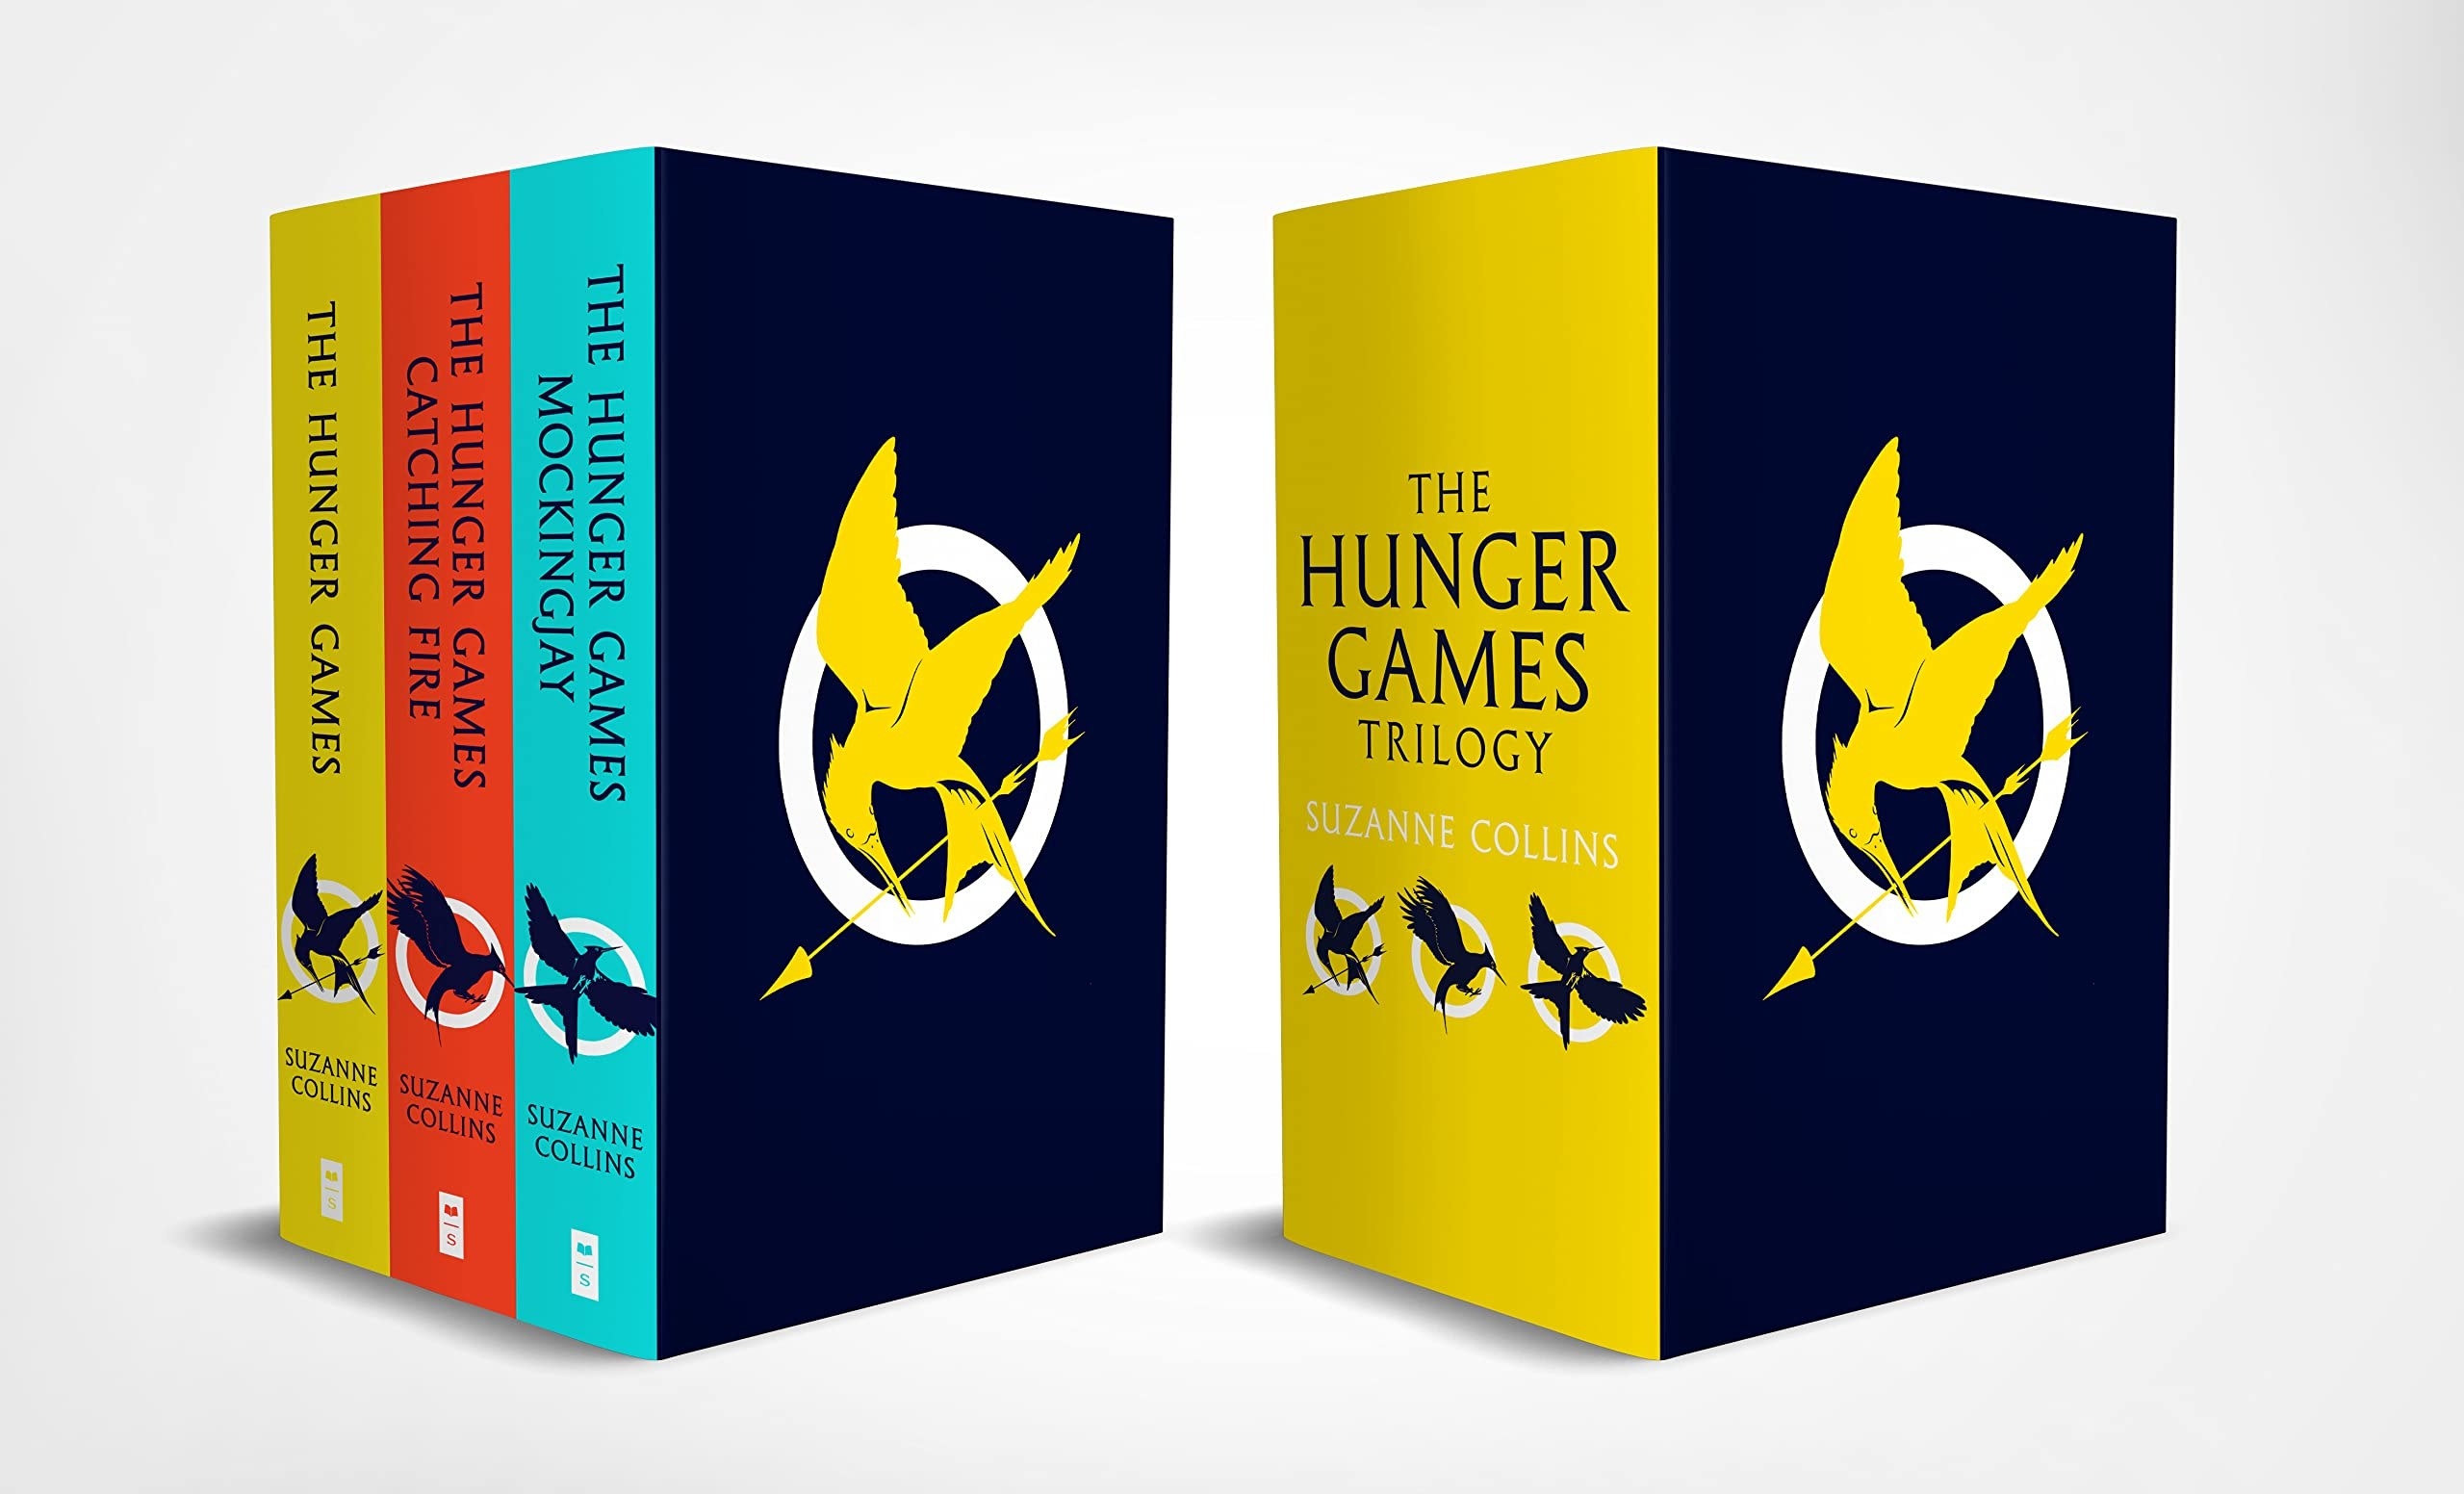 The box set of the Hunger Games books, One is yellow, one is orange and the other is blue. The box is dark blue with a yellow bird on it.